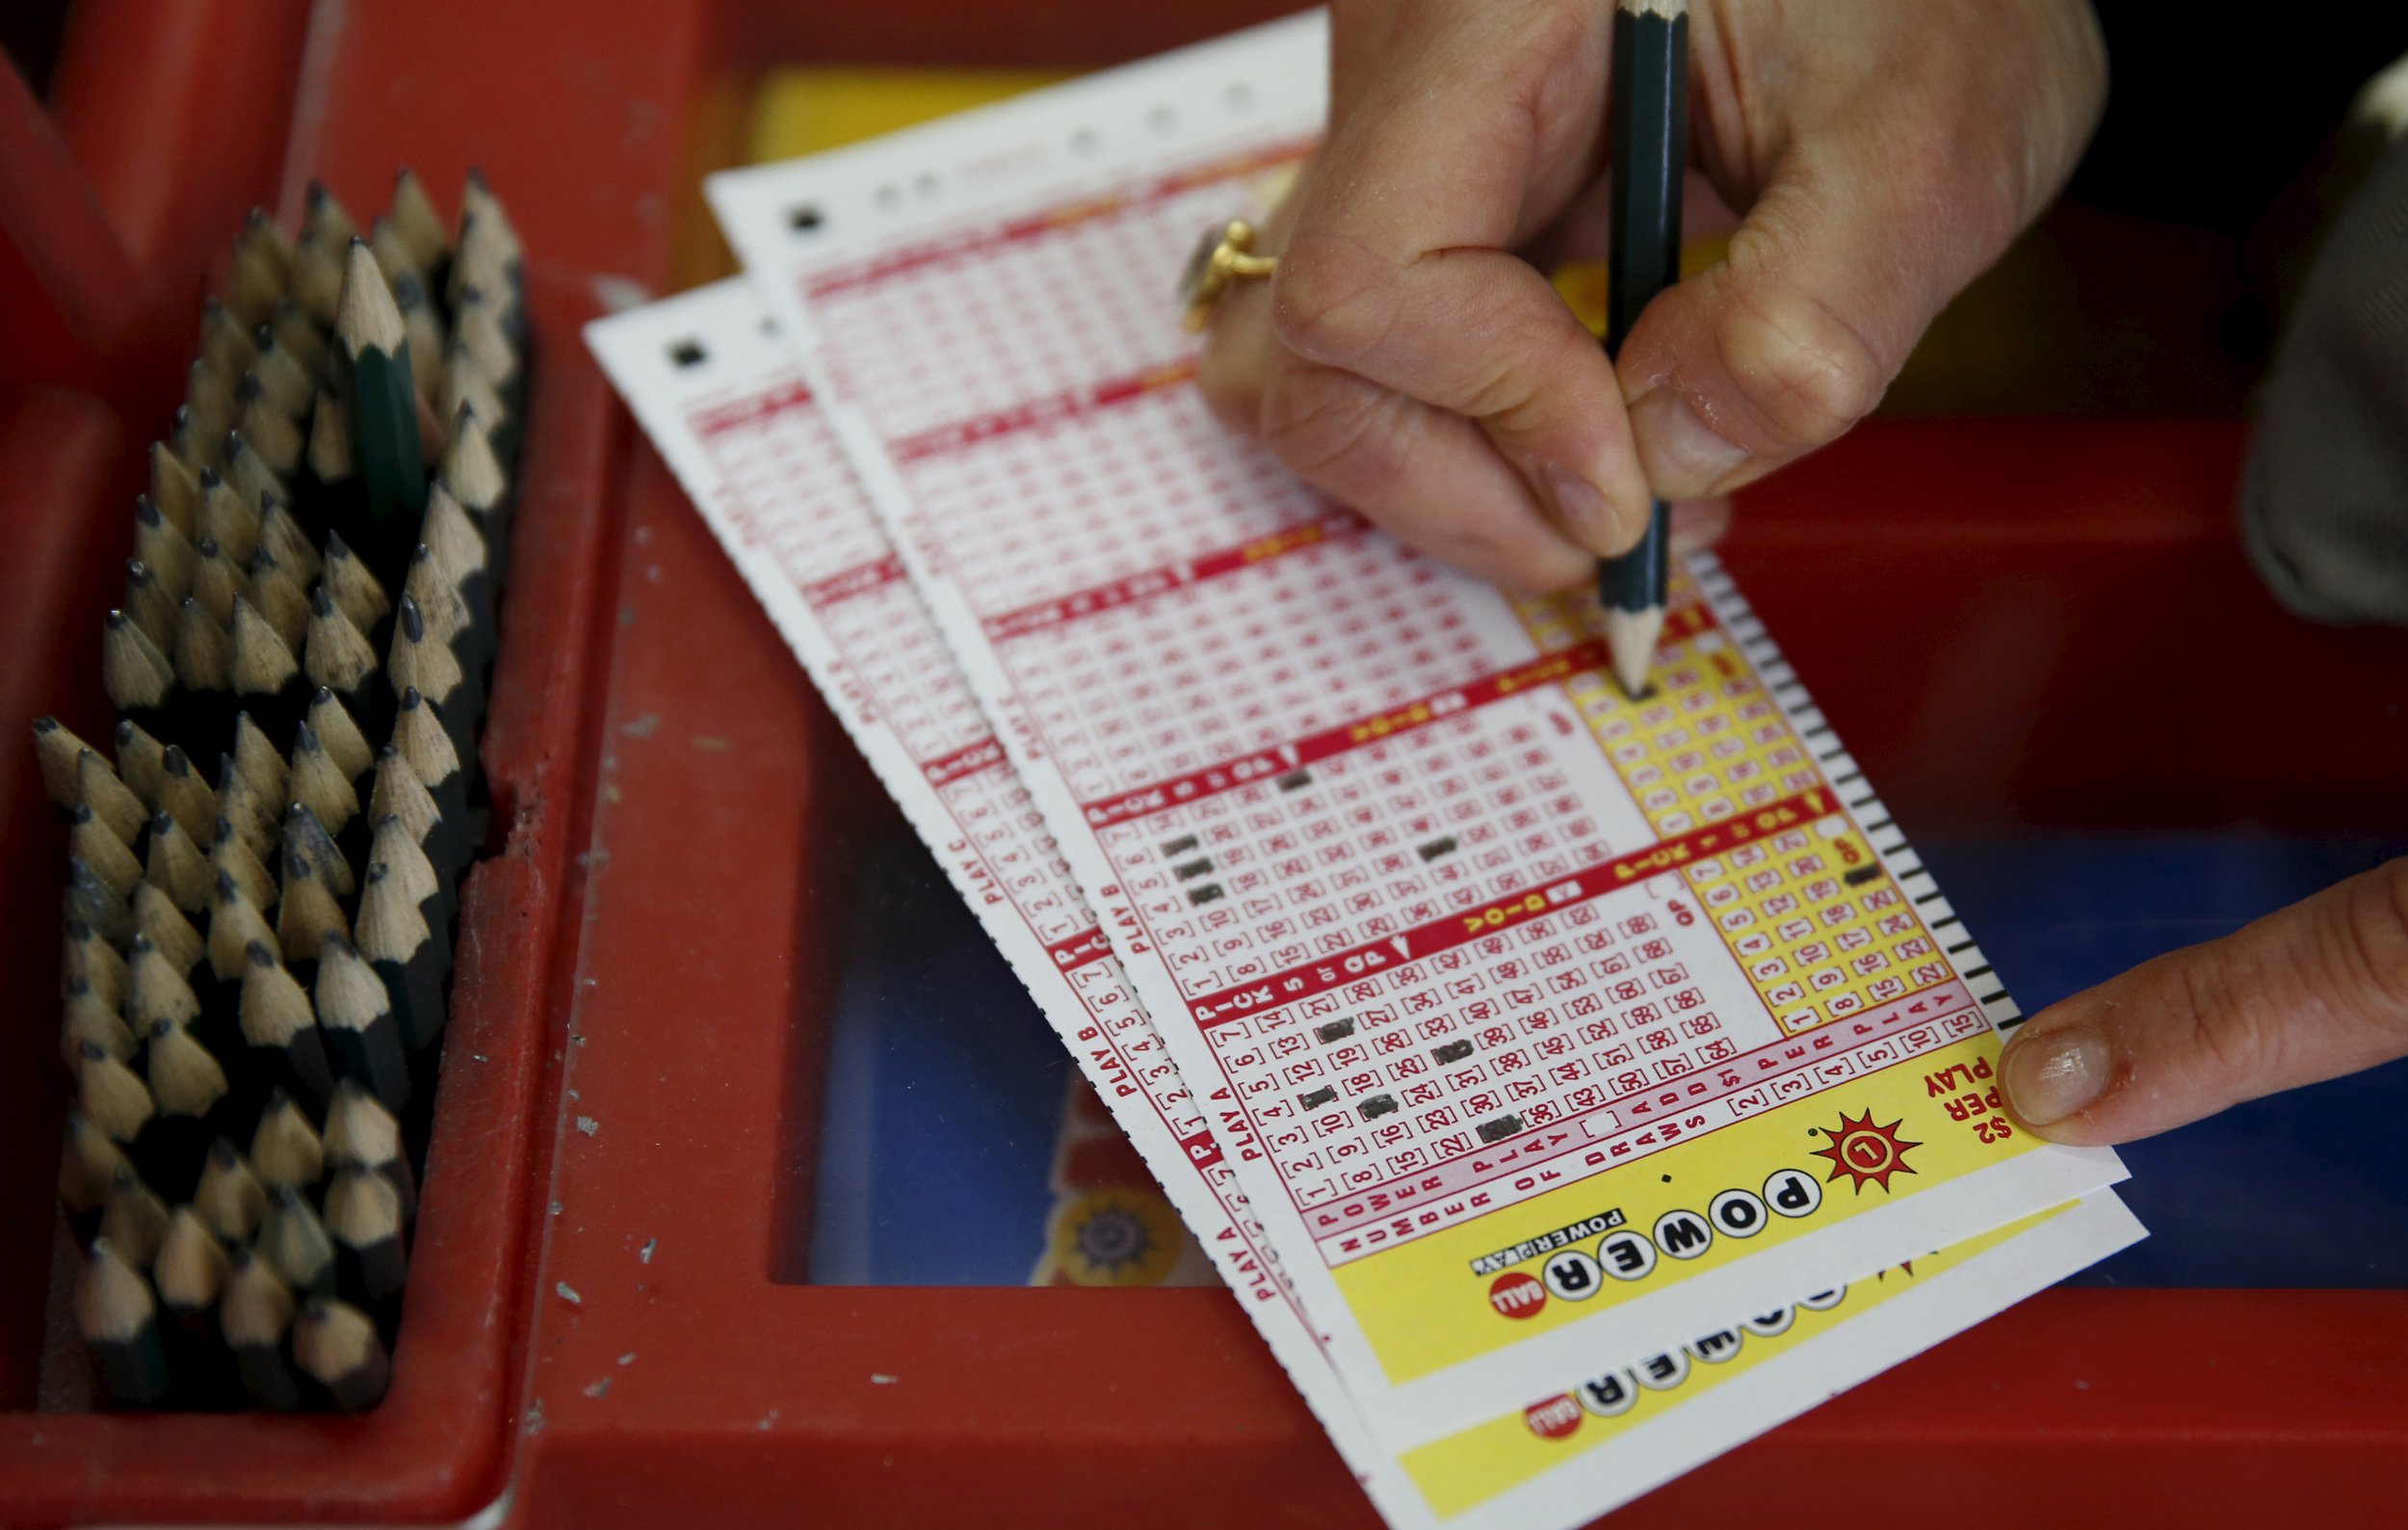 Powerball Drawing Live Stream 2016 Start Time, TV Channel To Watch